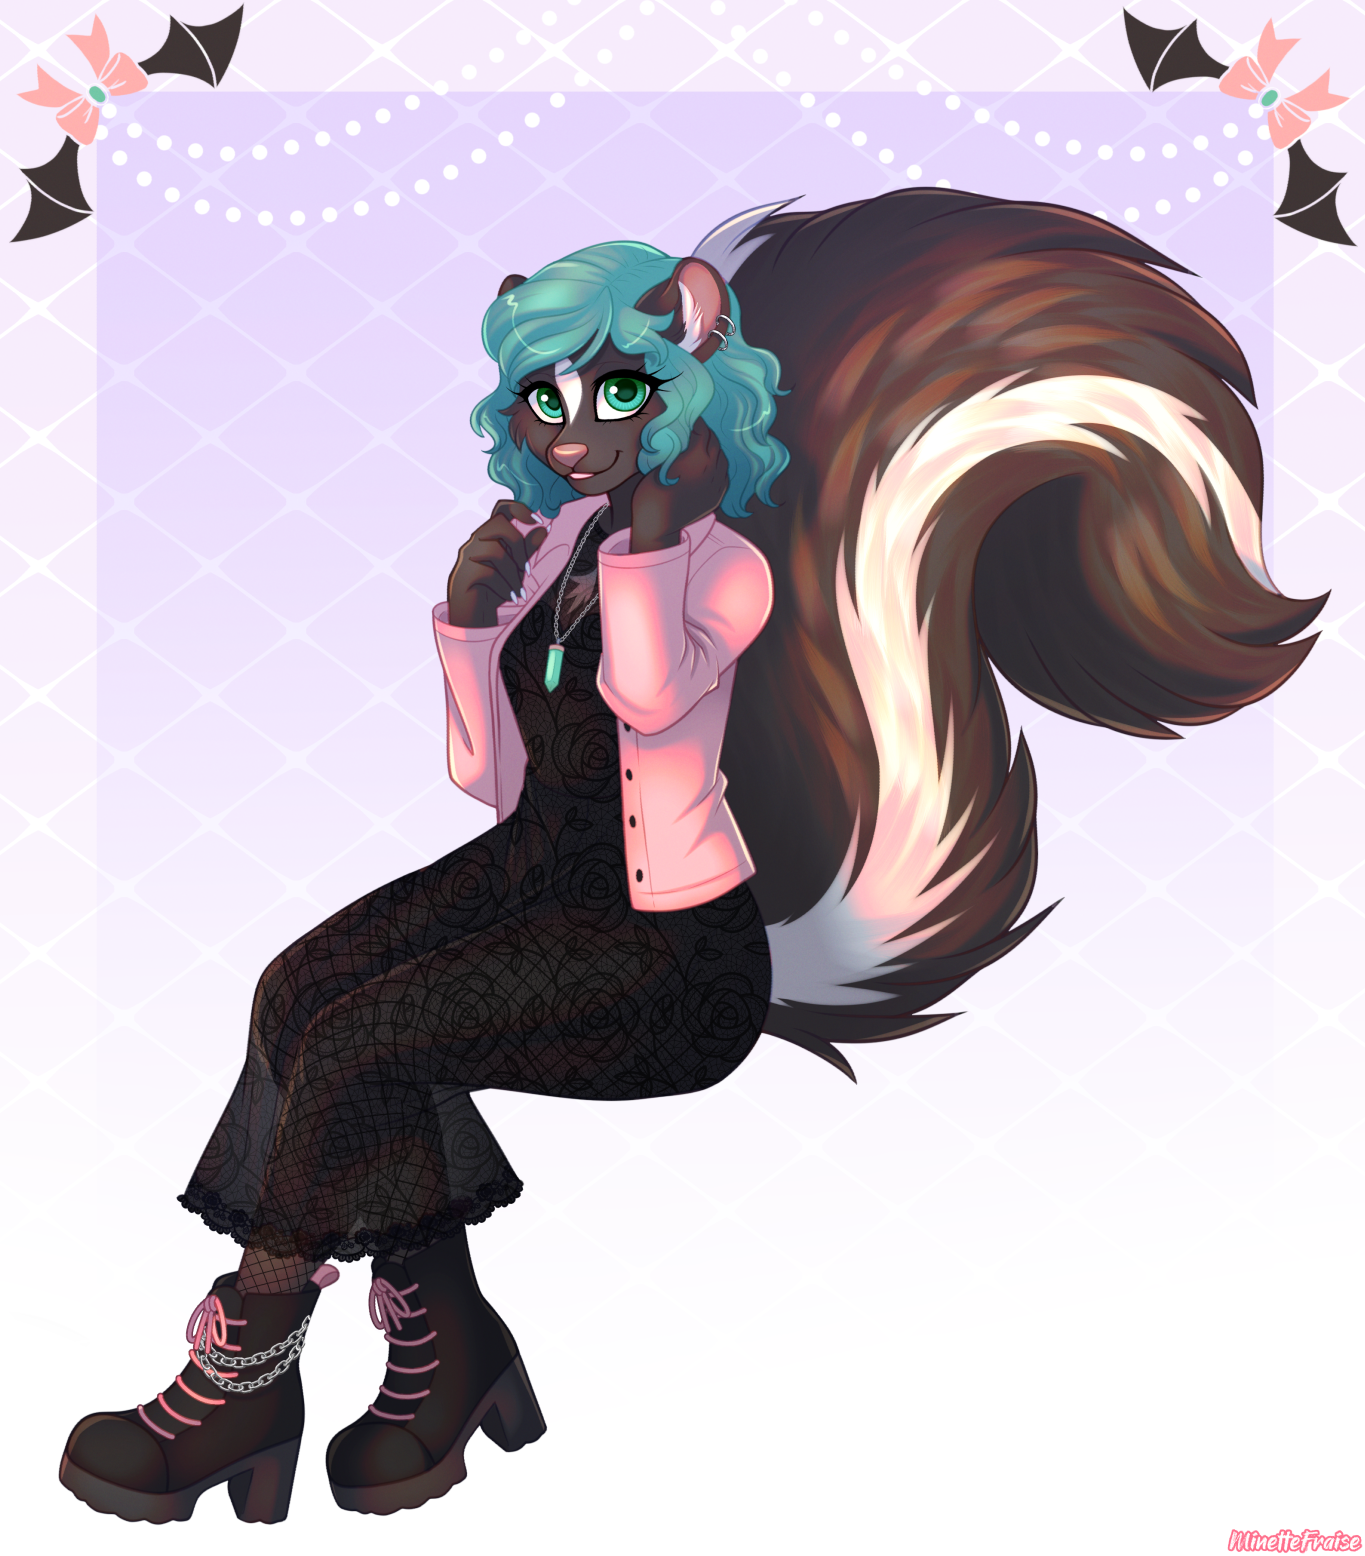 Art of a pastel goth anthropomorphic skunk with teal hair.